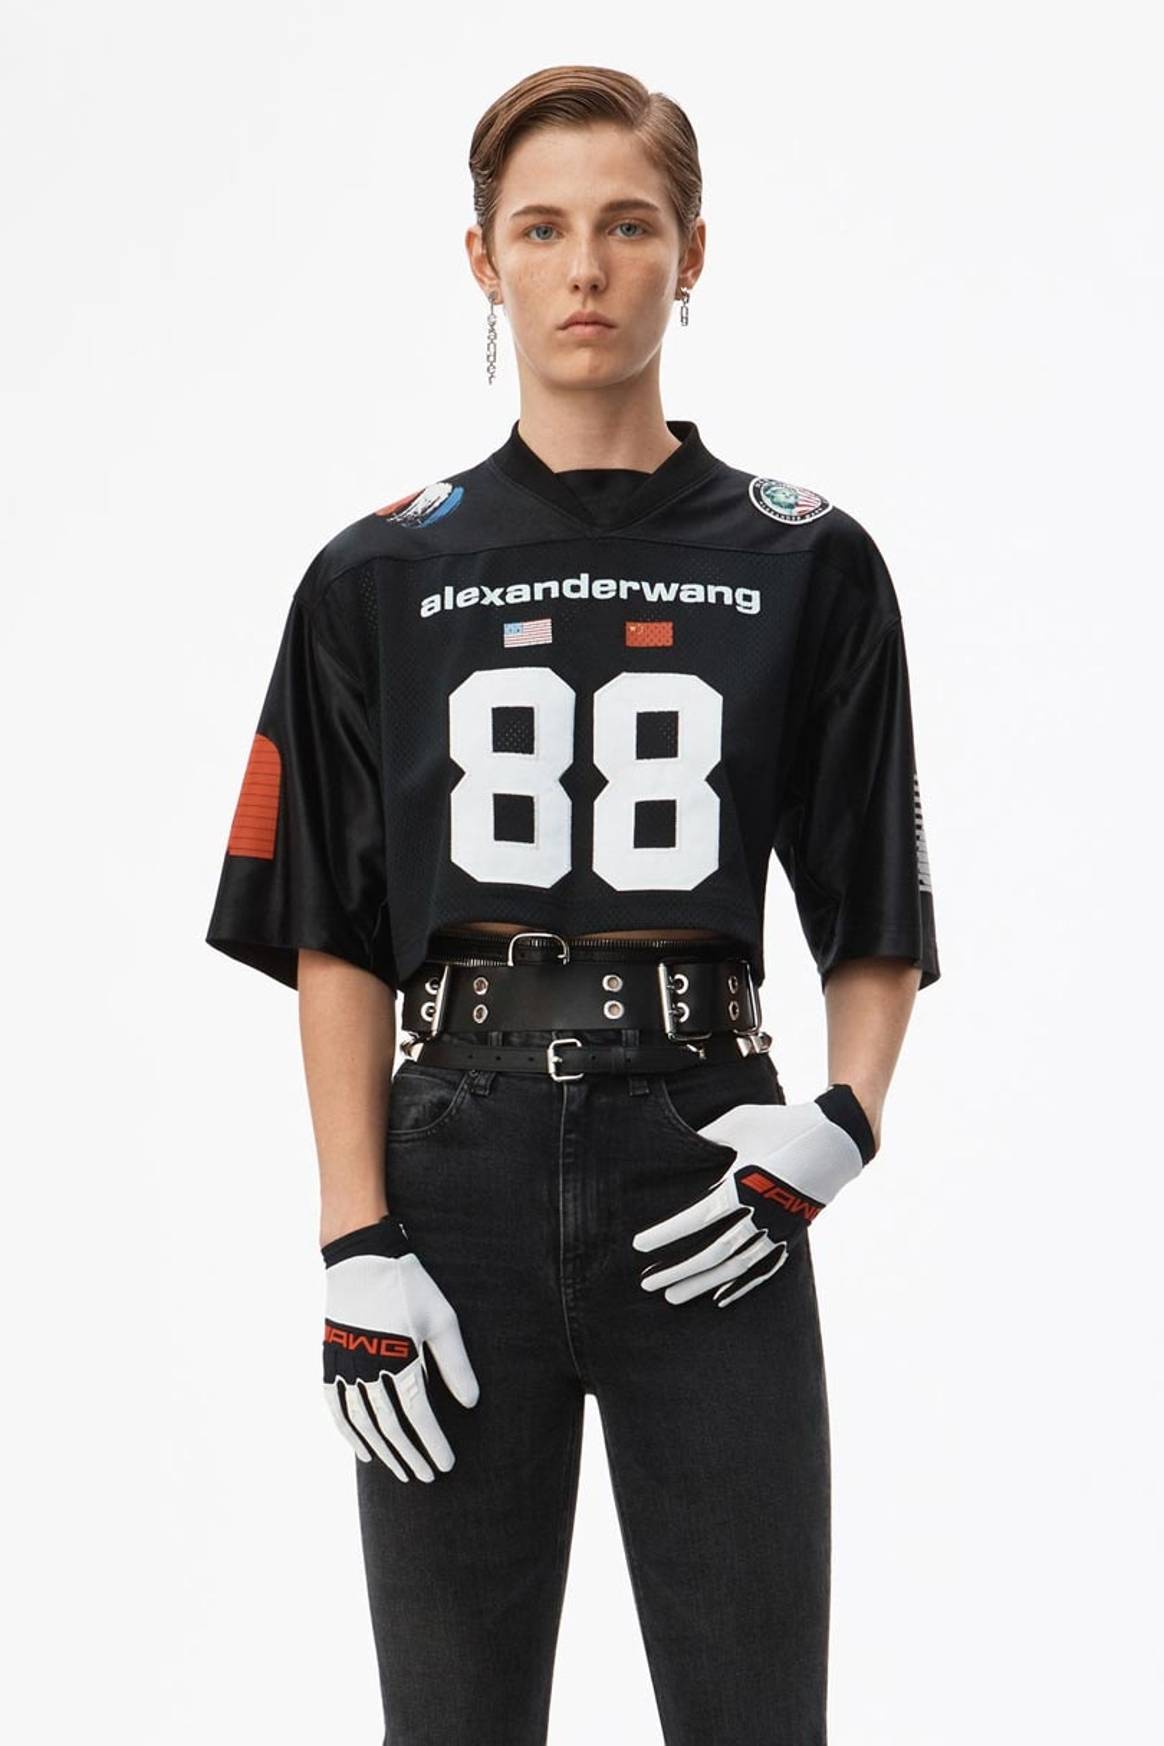 In Pictures: Alexander Wang pays tribute to the American rebel with new collection